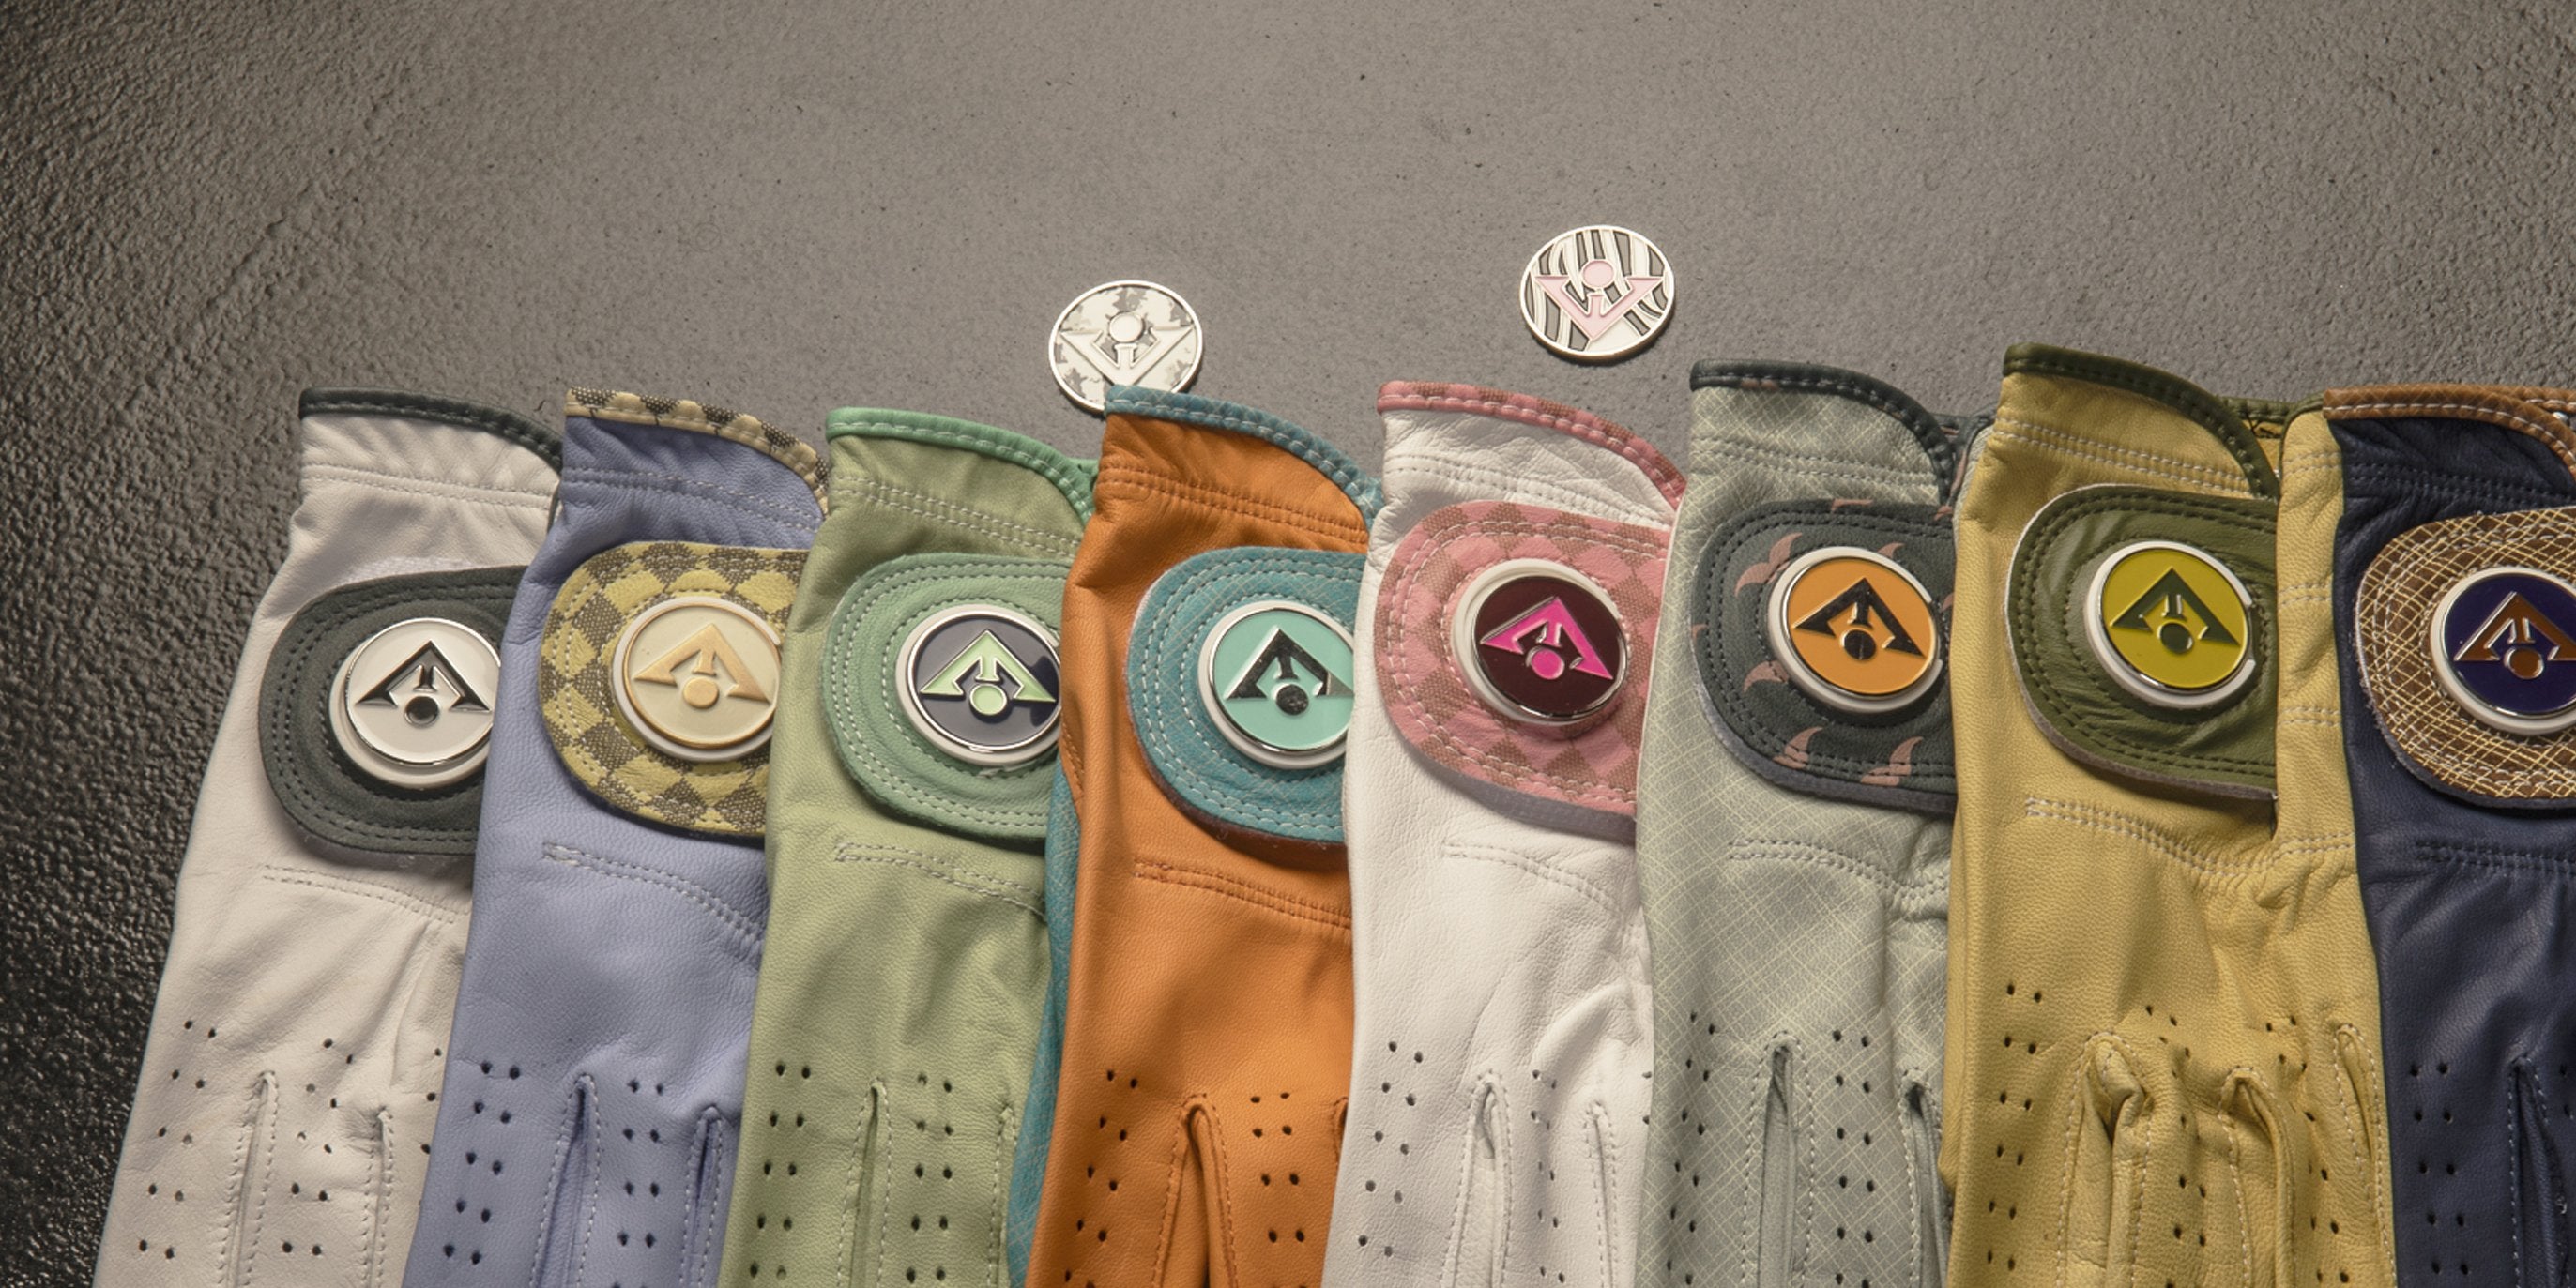 Line of VivanTee designer golf gloves across a variety of different colors and styles.